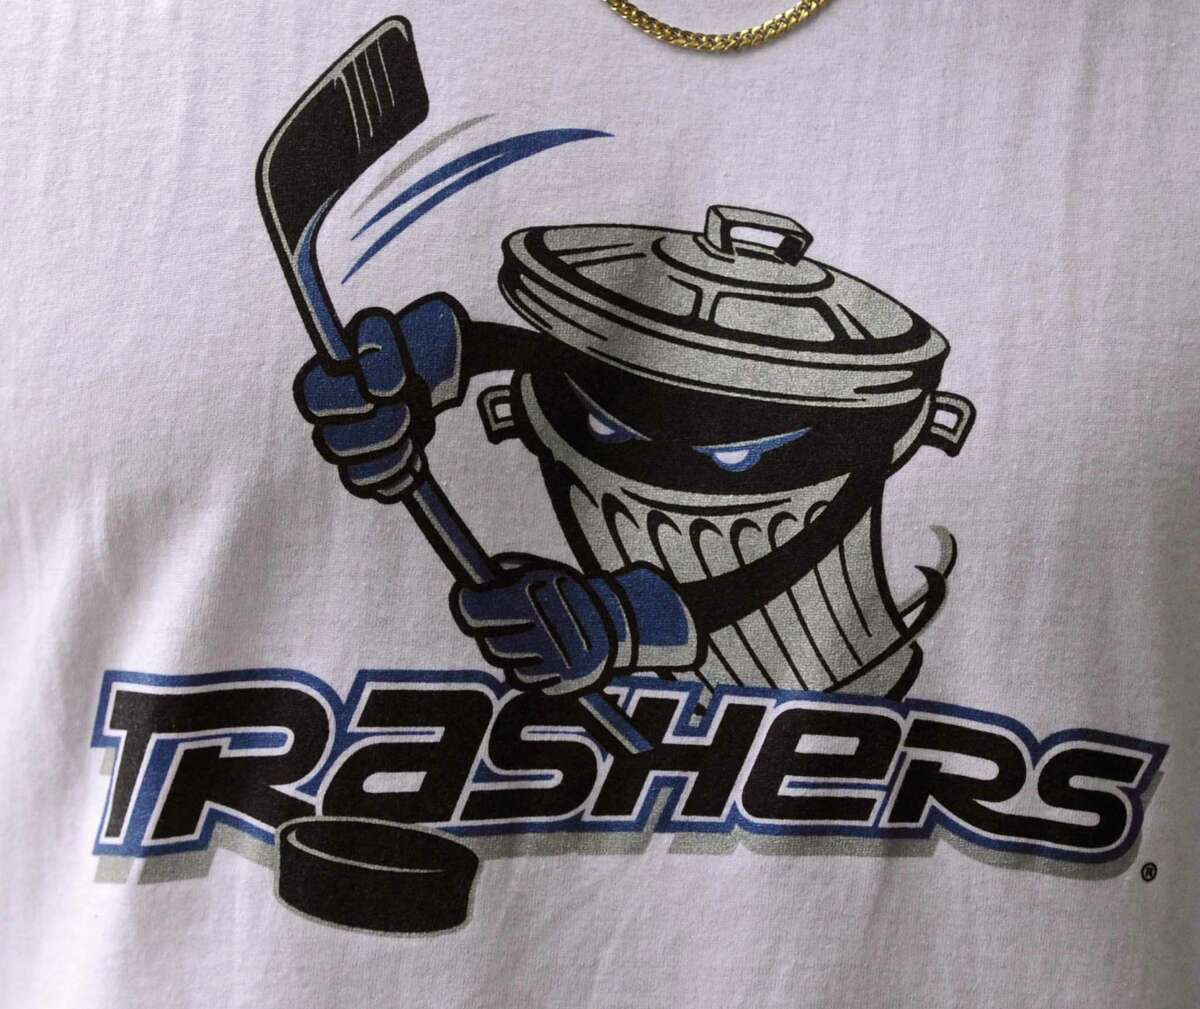 Hollywood is making a movie about the Danbury Trashers